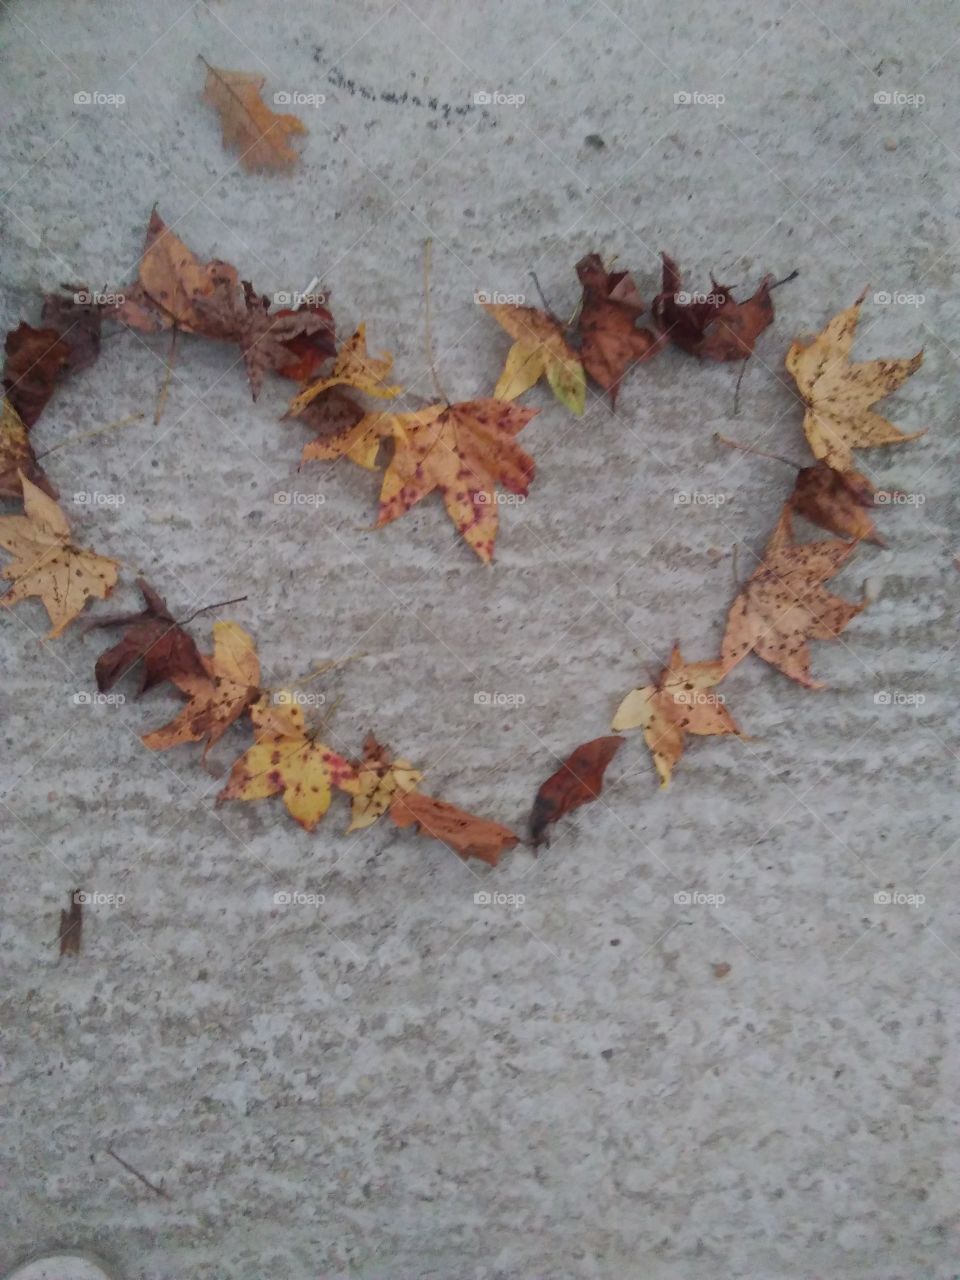 My heart is fragile as if it were made from leaves